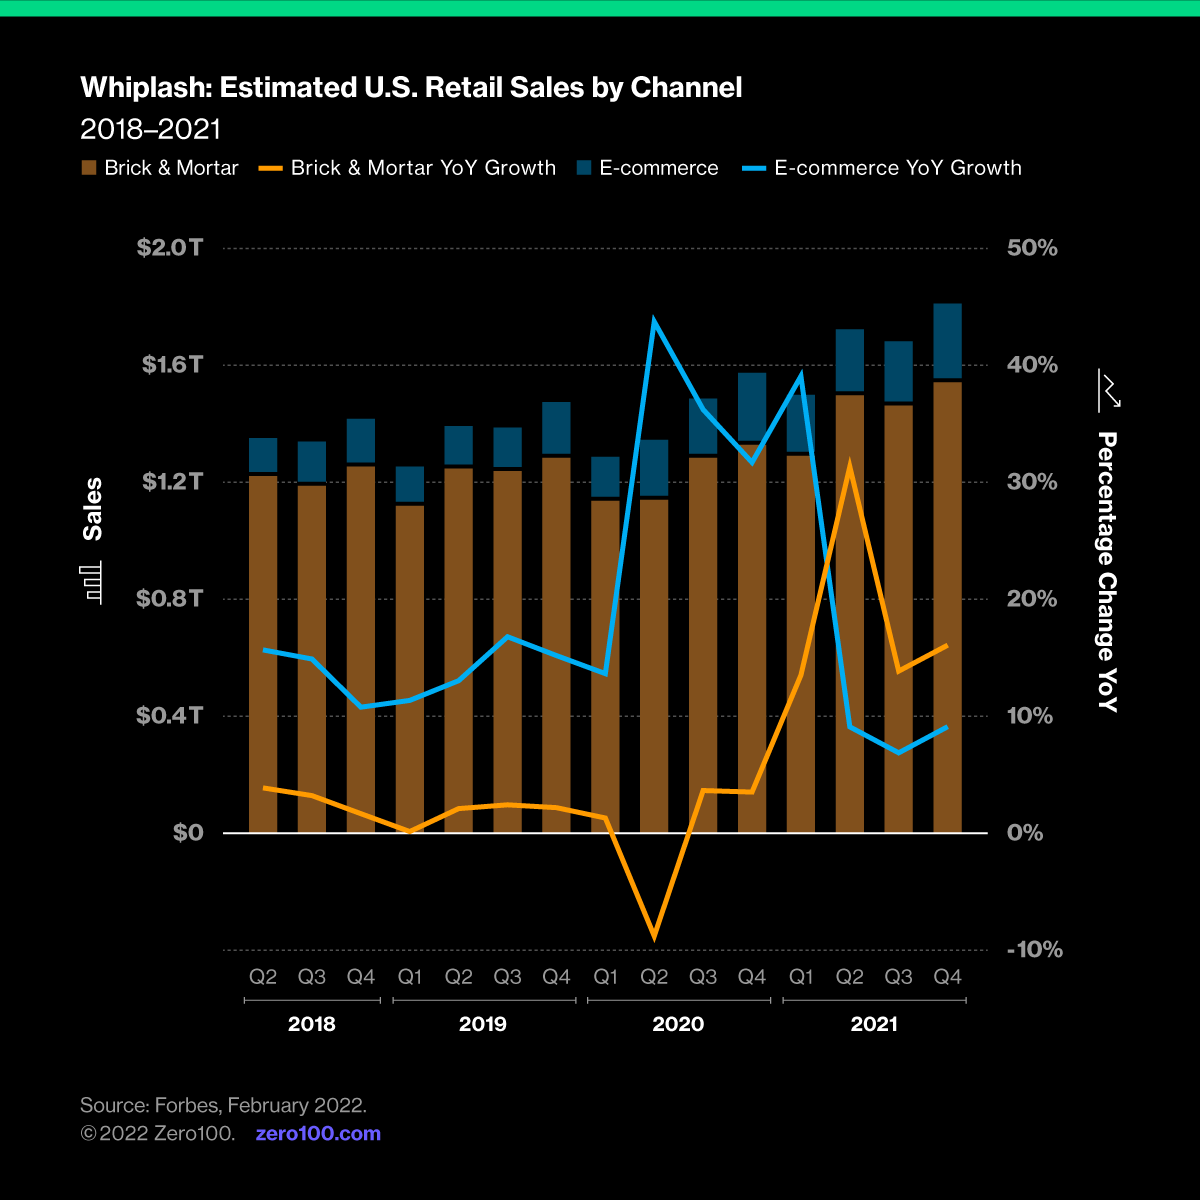 Graph depicting whiplash: estimated U.S. retail sales by channel. Source: Forbes, February 2022.